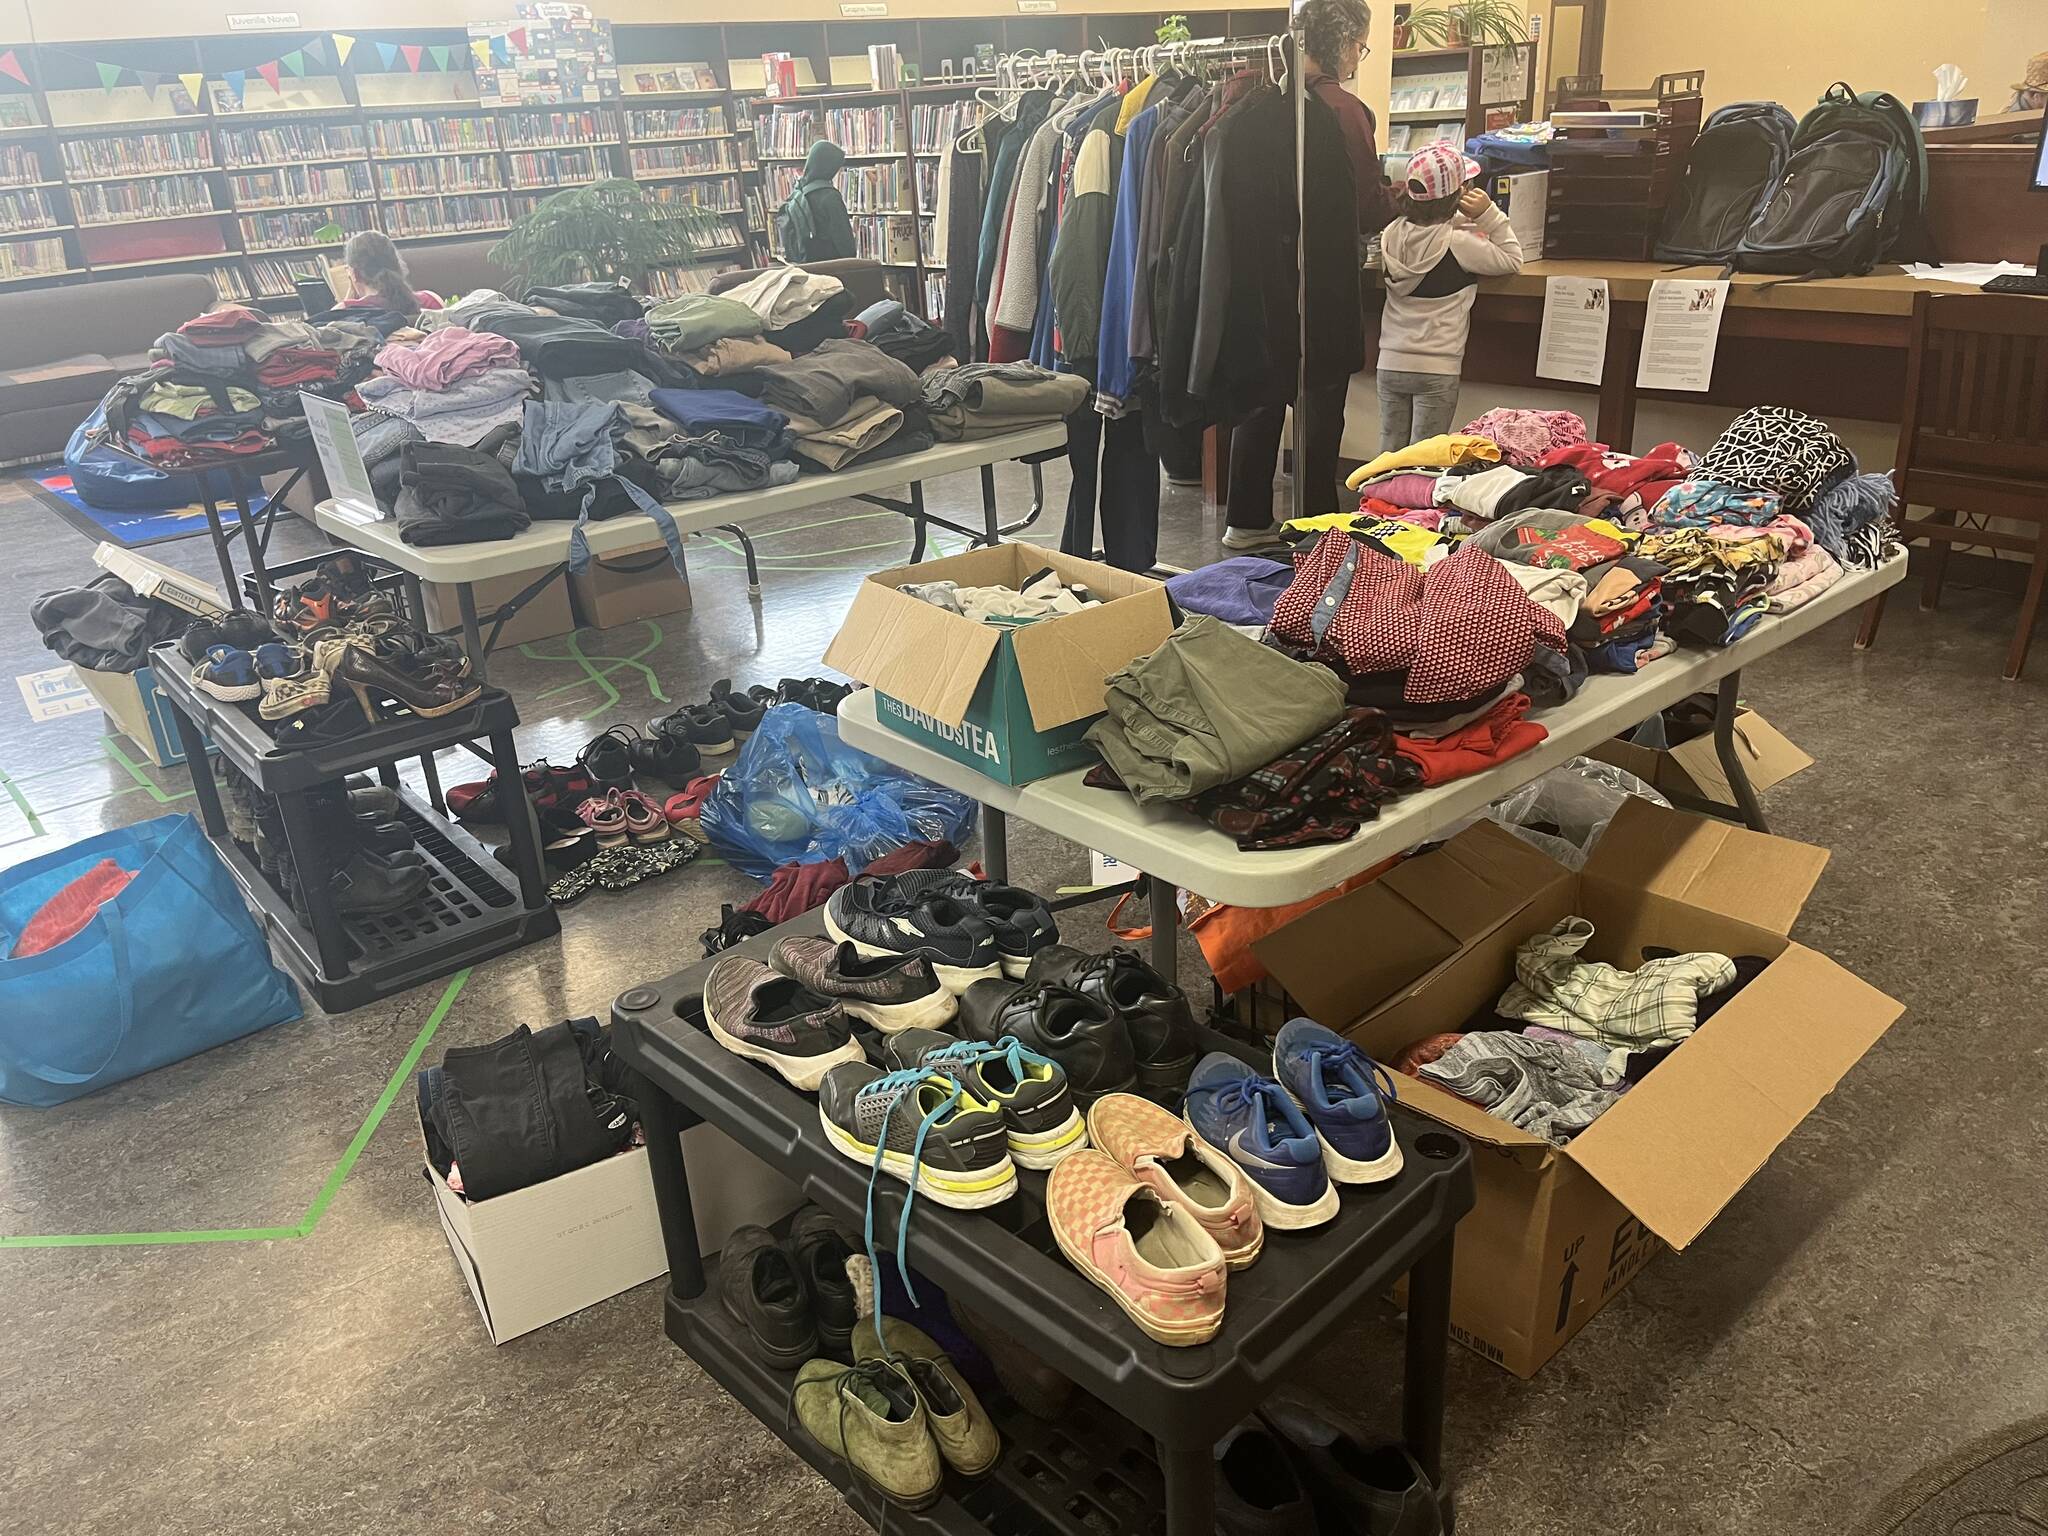 Over the past couple of weeks, Peace River Municipal Library has hosted its annual Wastenot Clothes Swap, an event that allows community members to donate lightly-used clothing and school supplies for those in need, including displaced NWT residents. Photo courtesy of Channing MacDonald